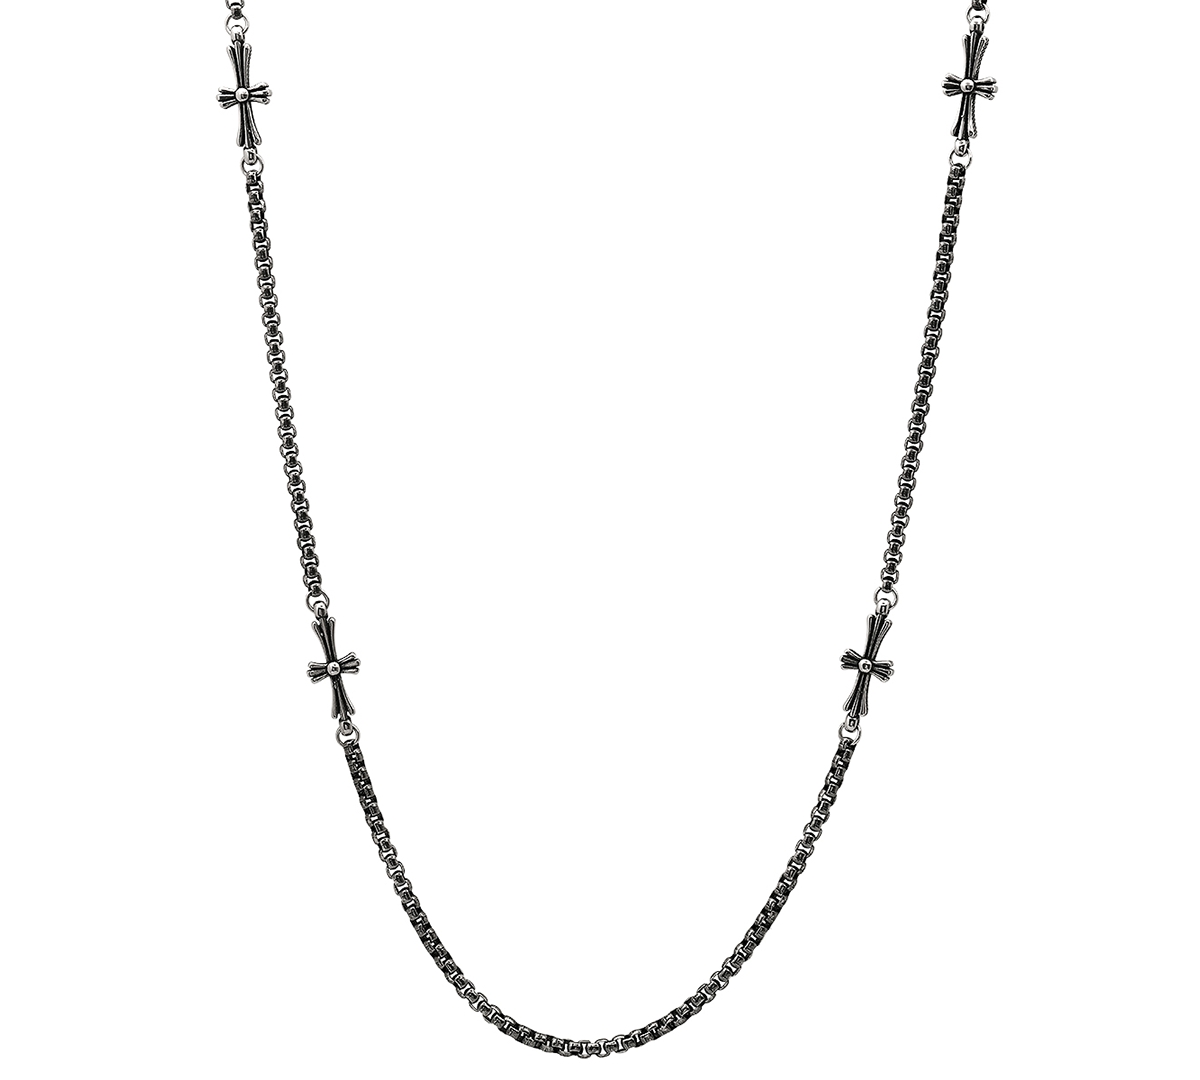 Shop Steeltime Men's Stainless Steel Round Link Chain & Crosses Necklace, 24" In Gunmetal